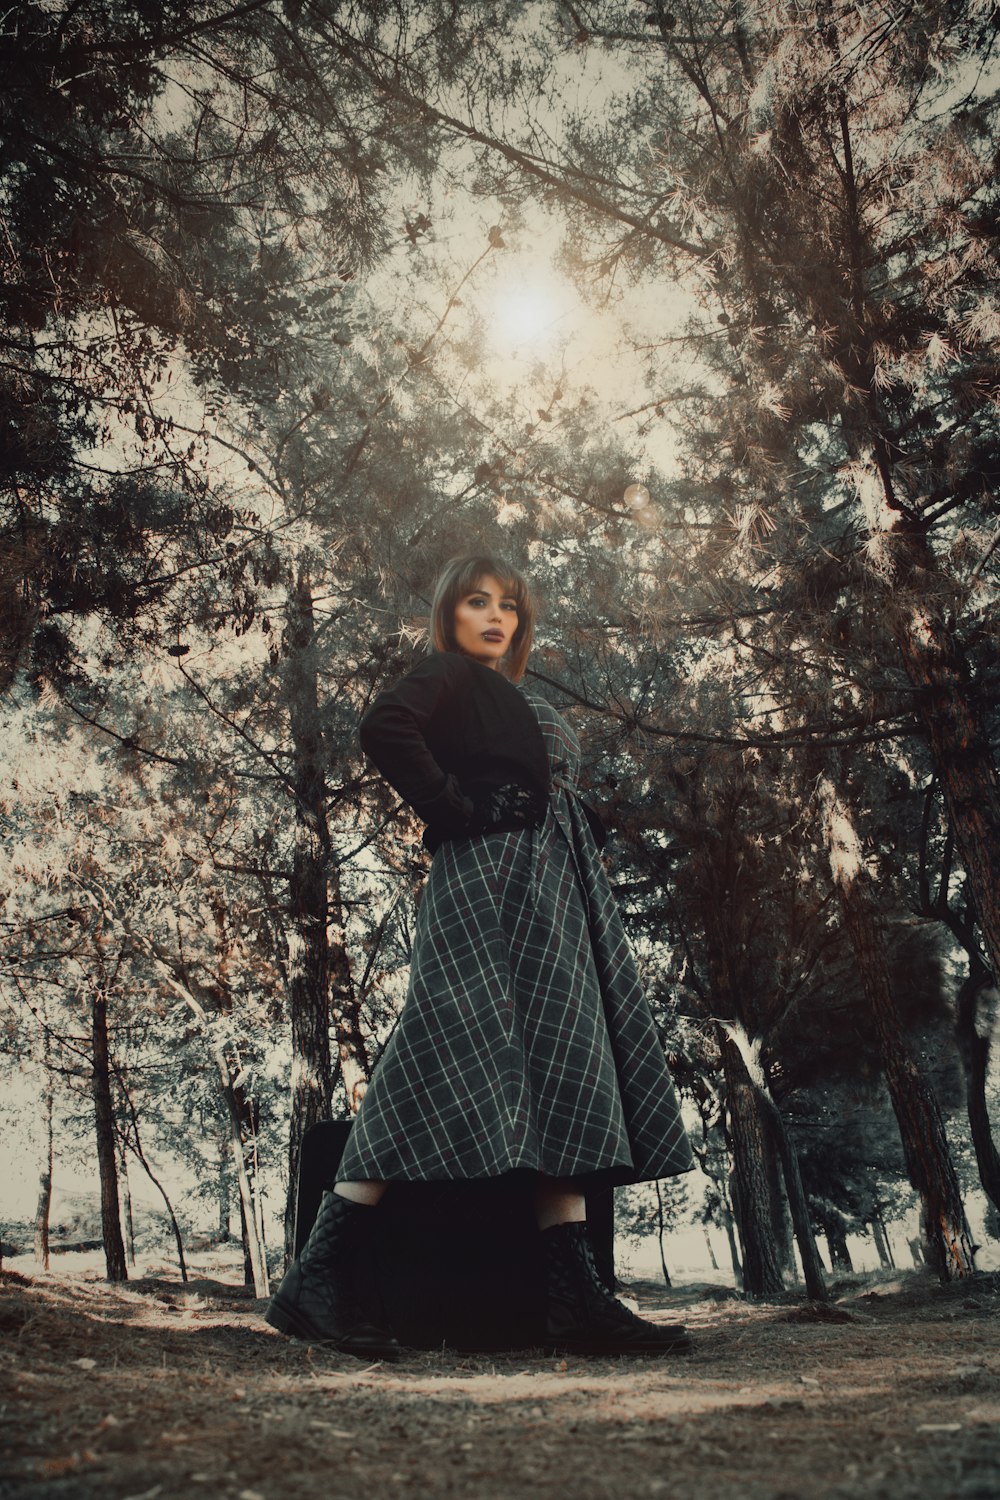 woman in black and white plaid dress standing under trees during daytime